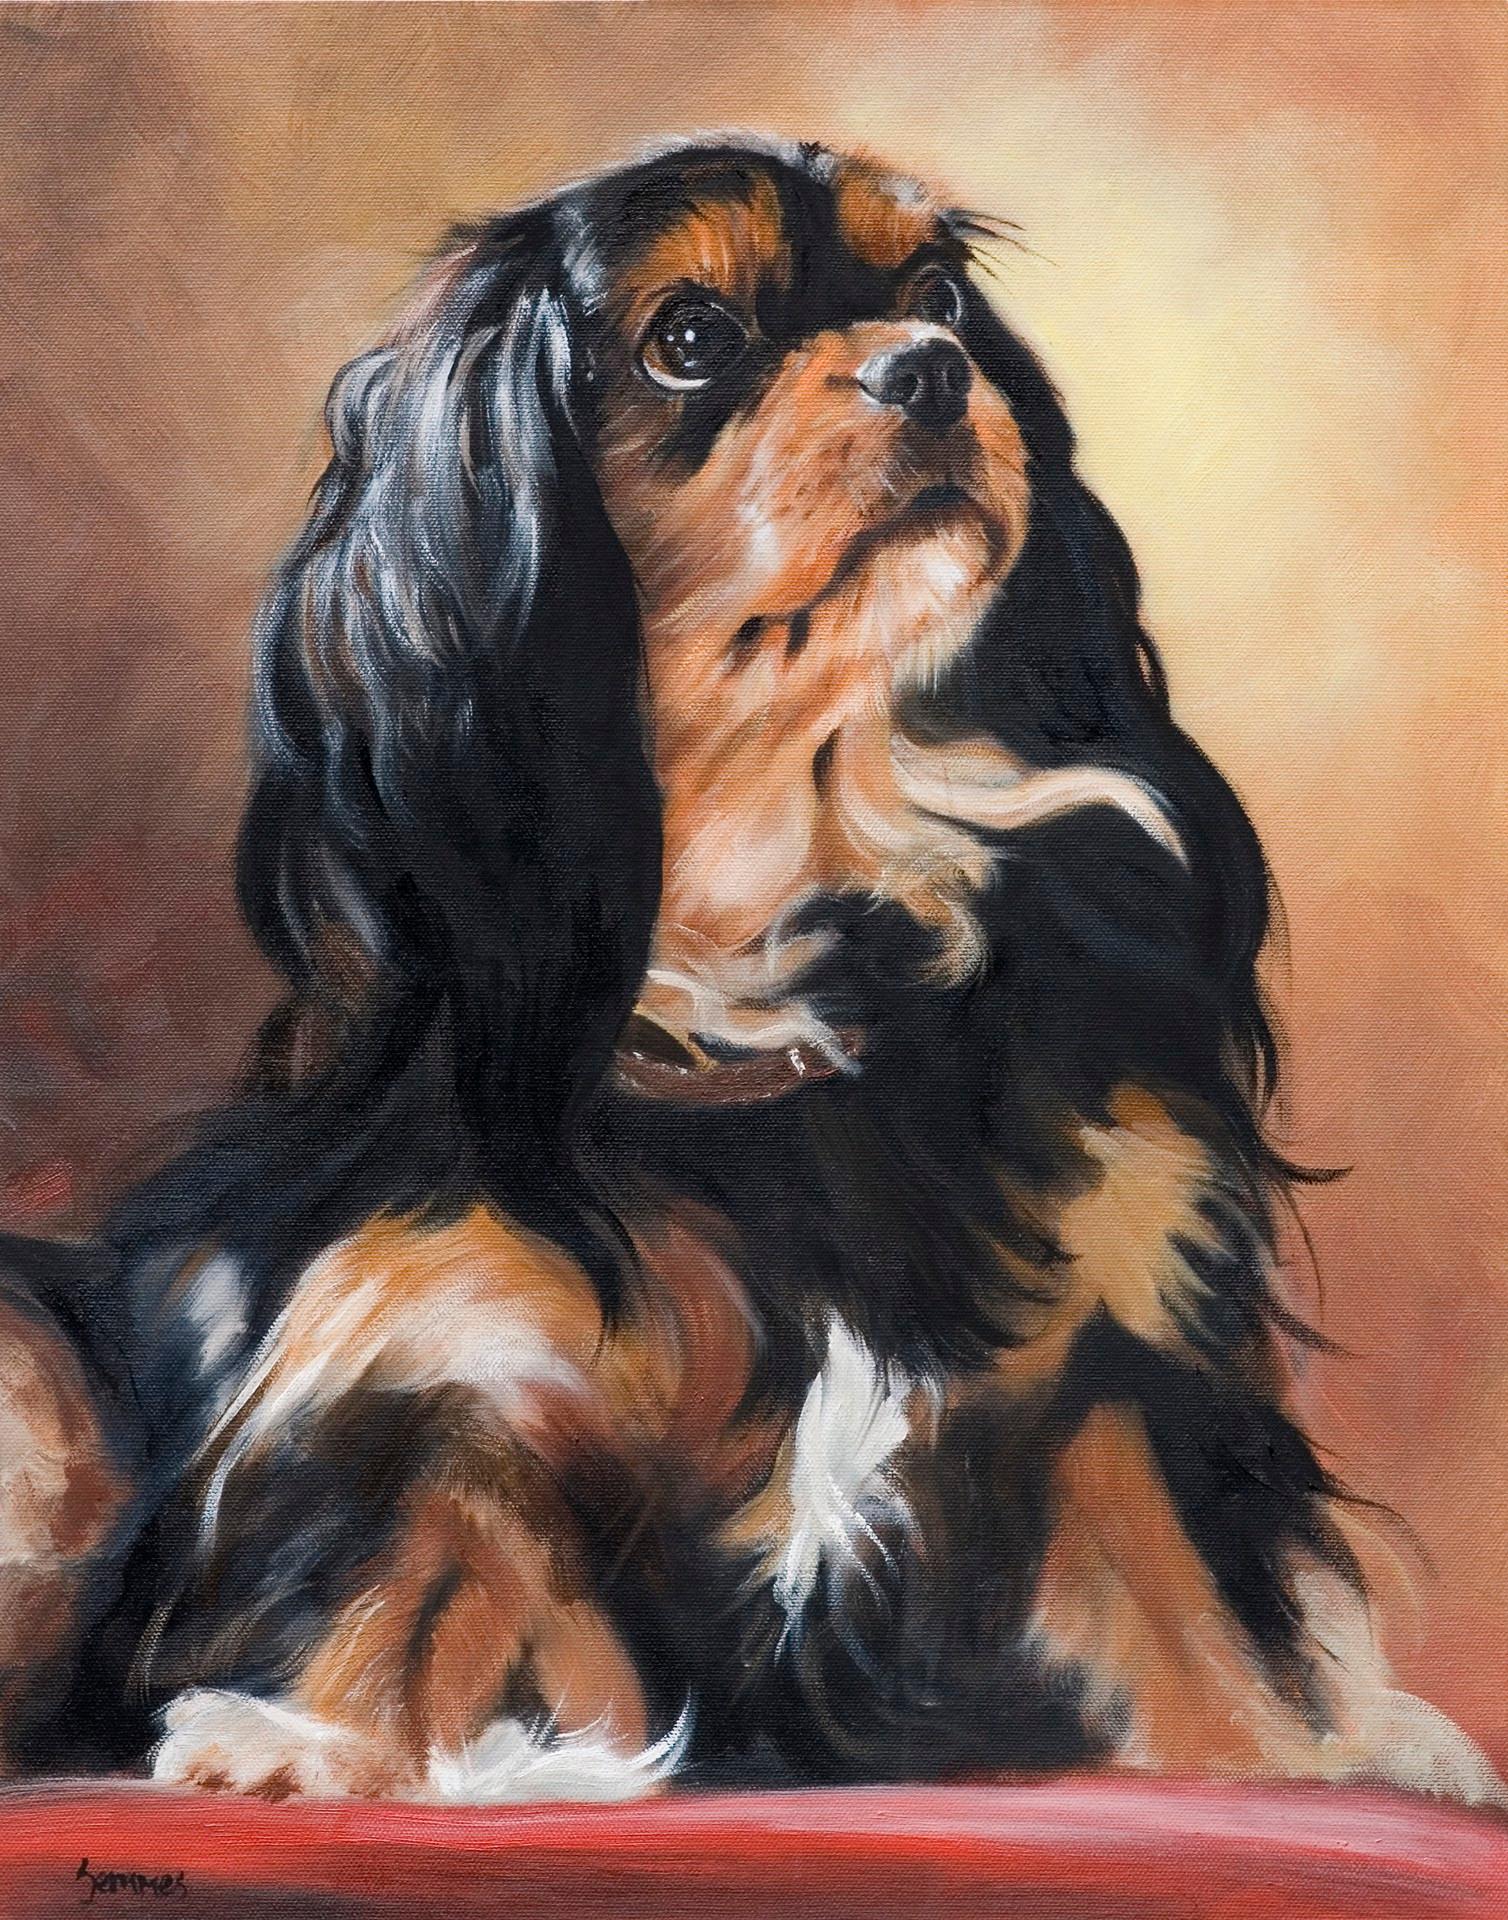 Faith Cameron Semmes Animal Painting - Romantic Cavalier King Charles Spaniel dog painting bathed in Caravaggio light